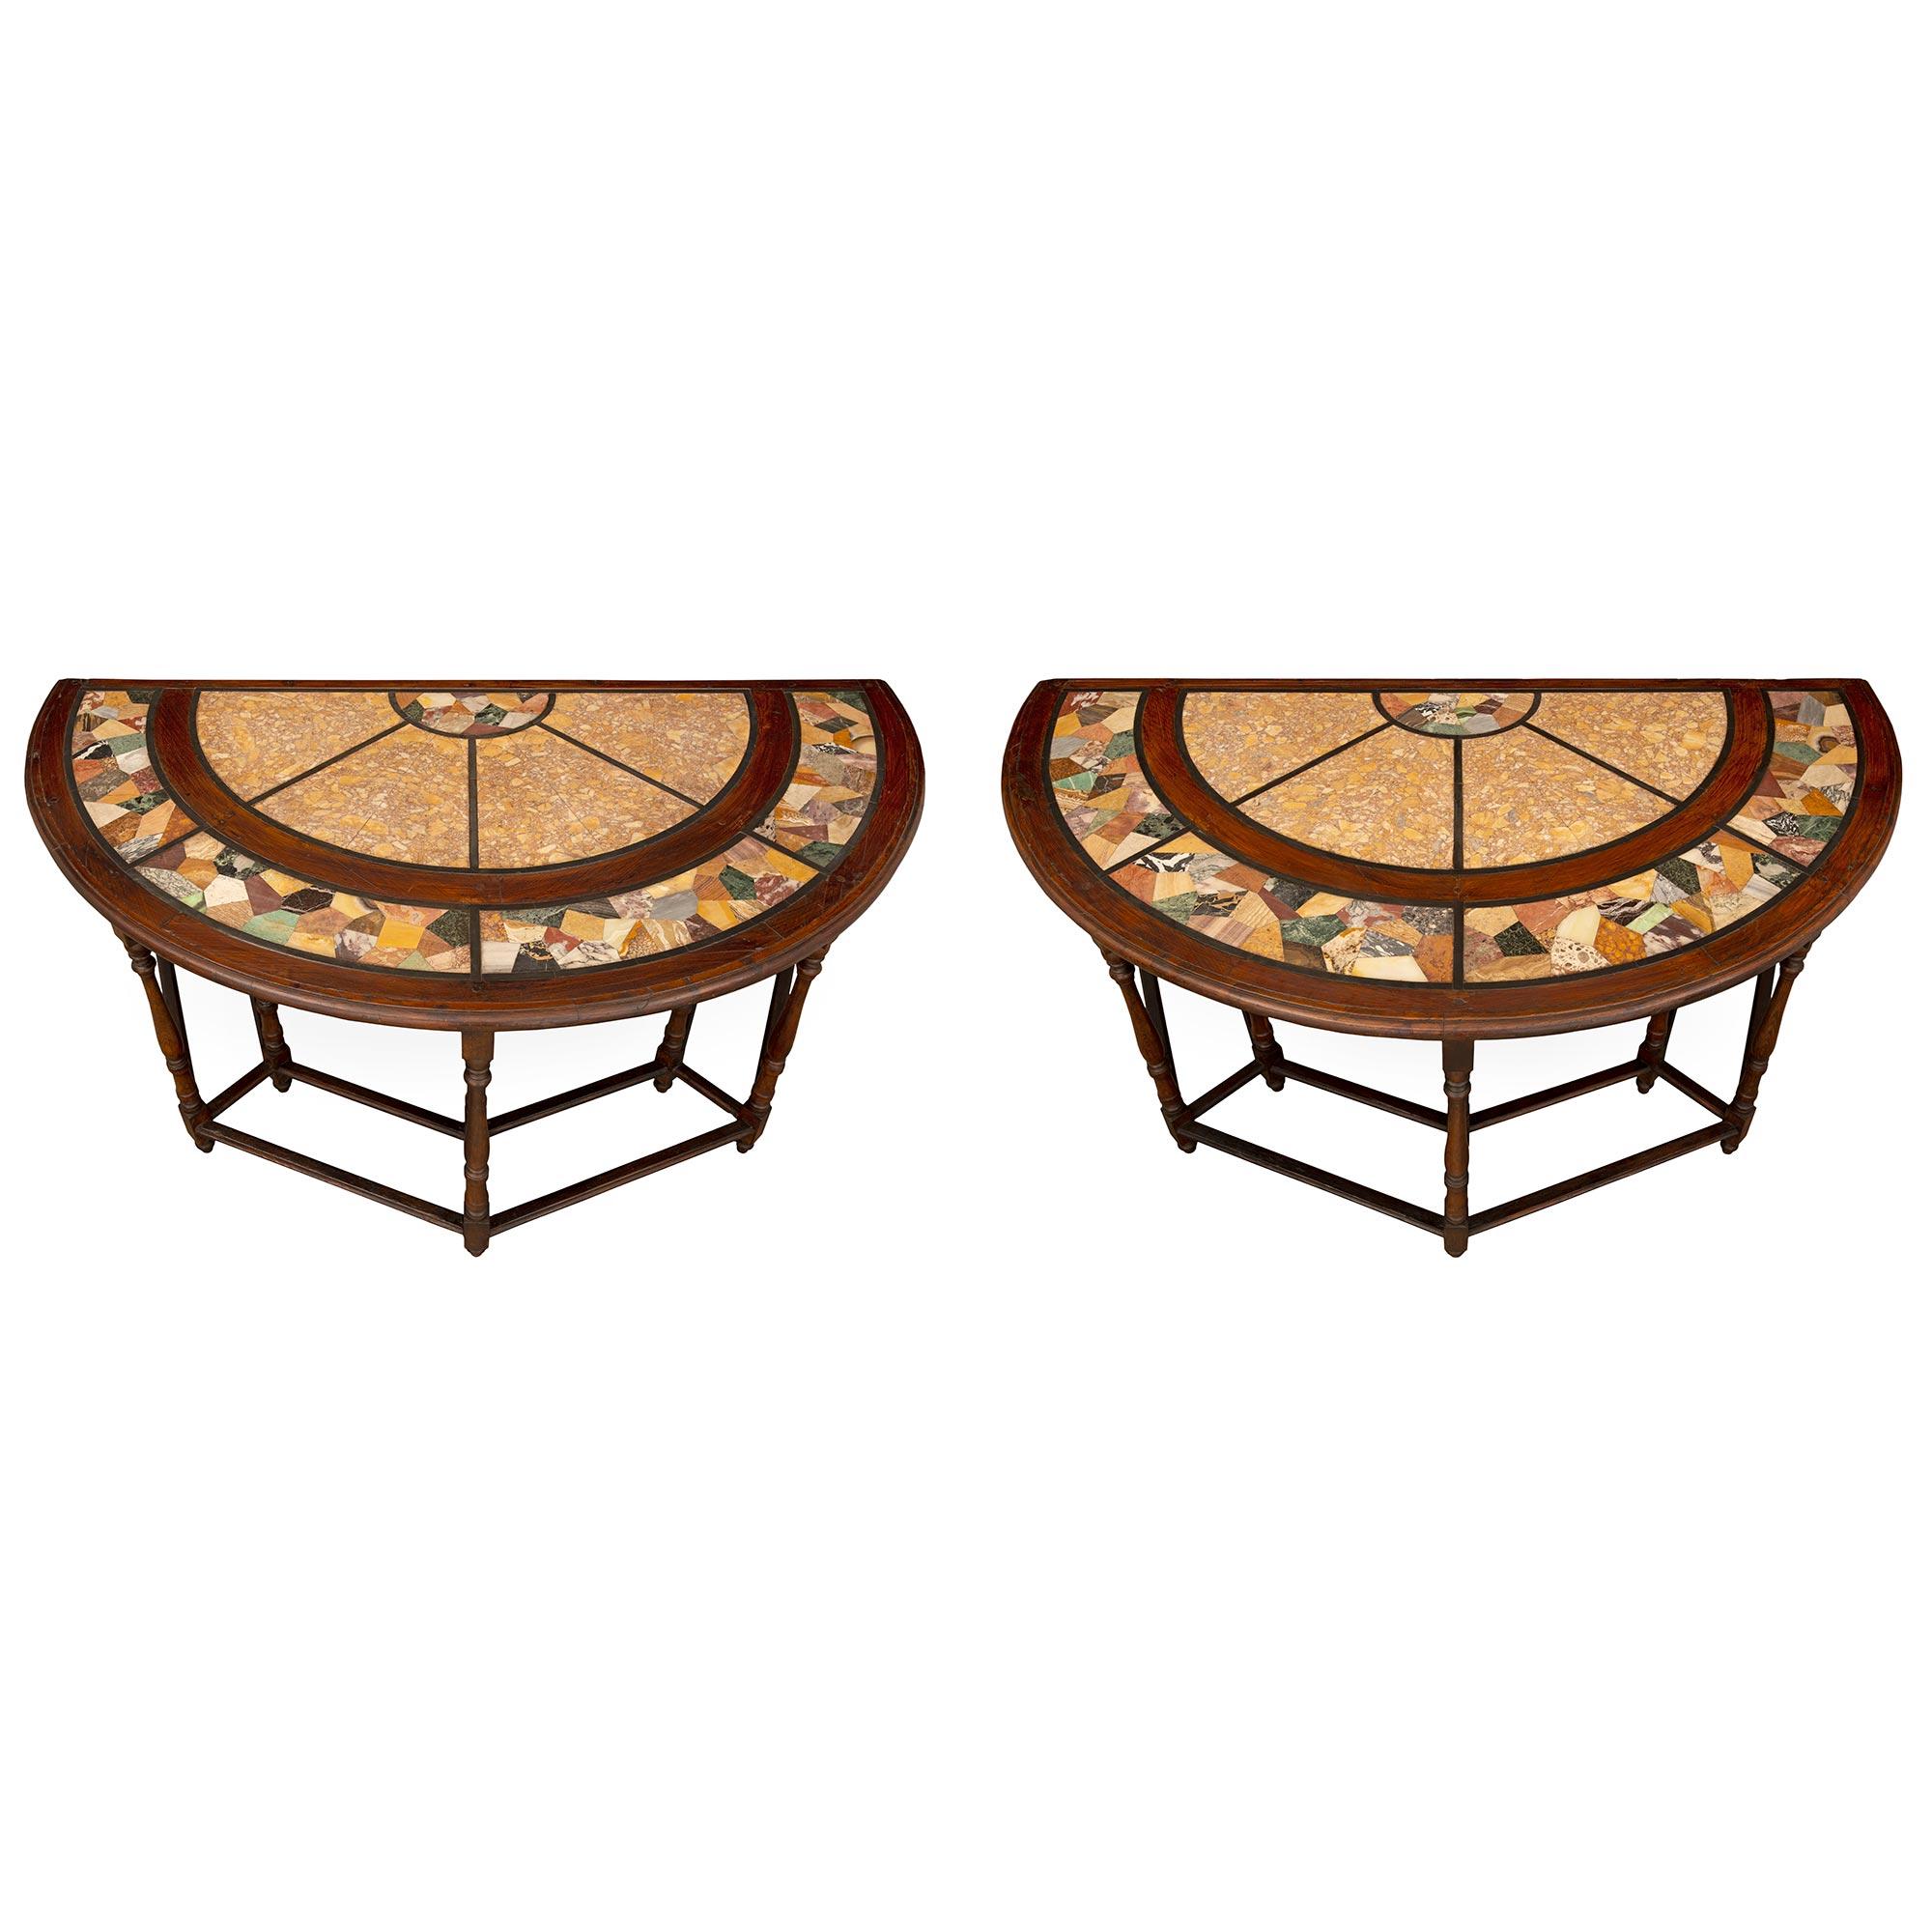 Pair of Italian 19th Century Walnut and Pietra Dura Consoles/Center Tables In Good Condition For Sale In West Palm Beach, FL